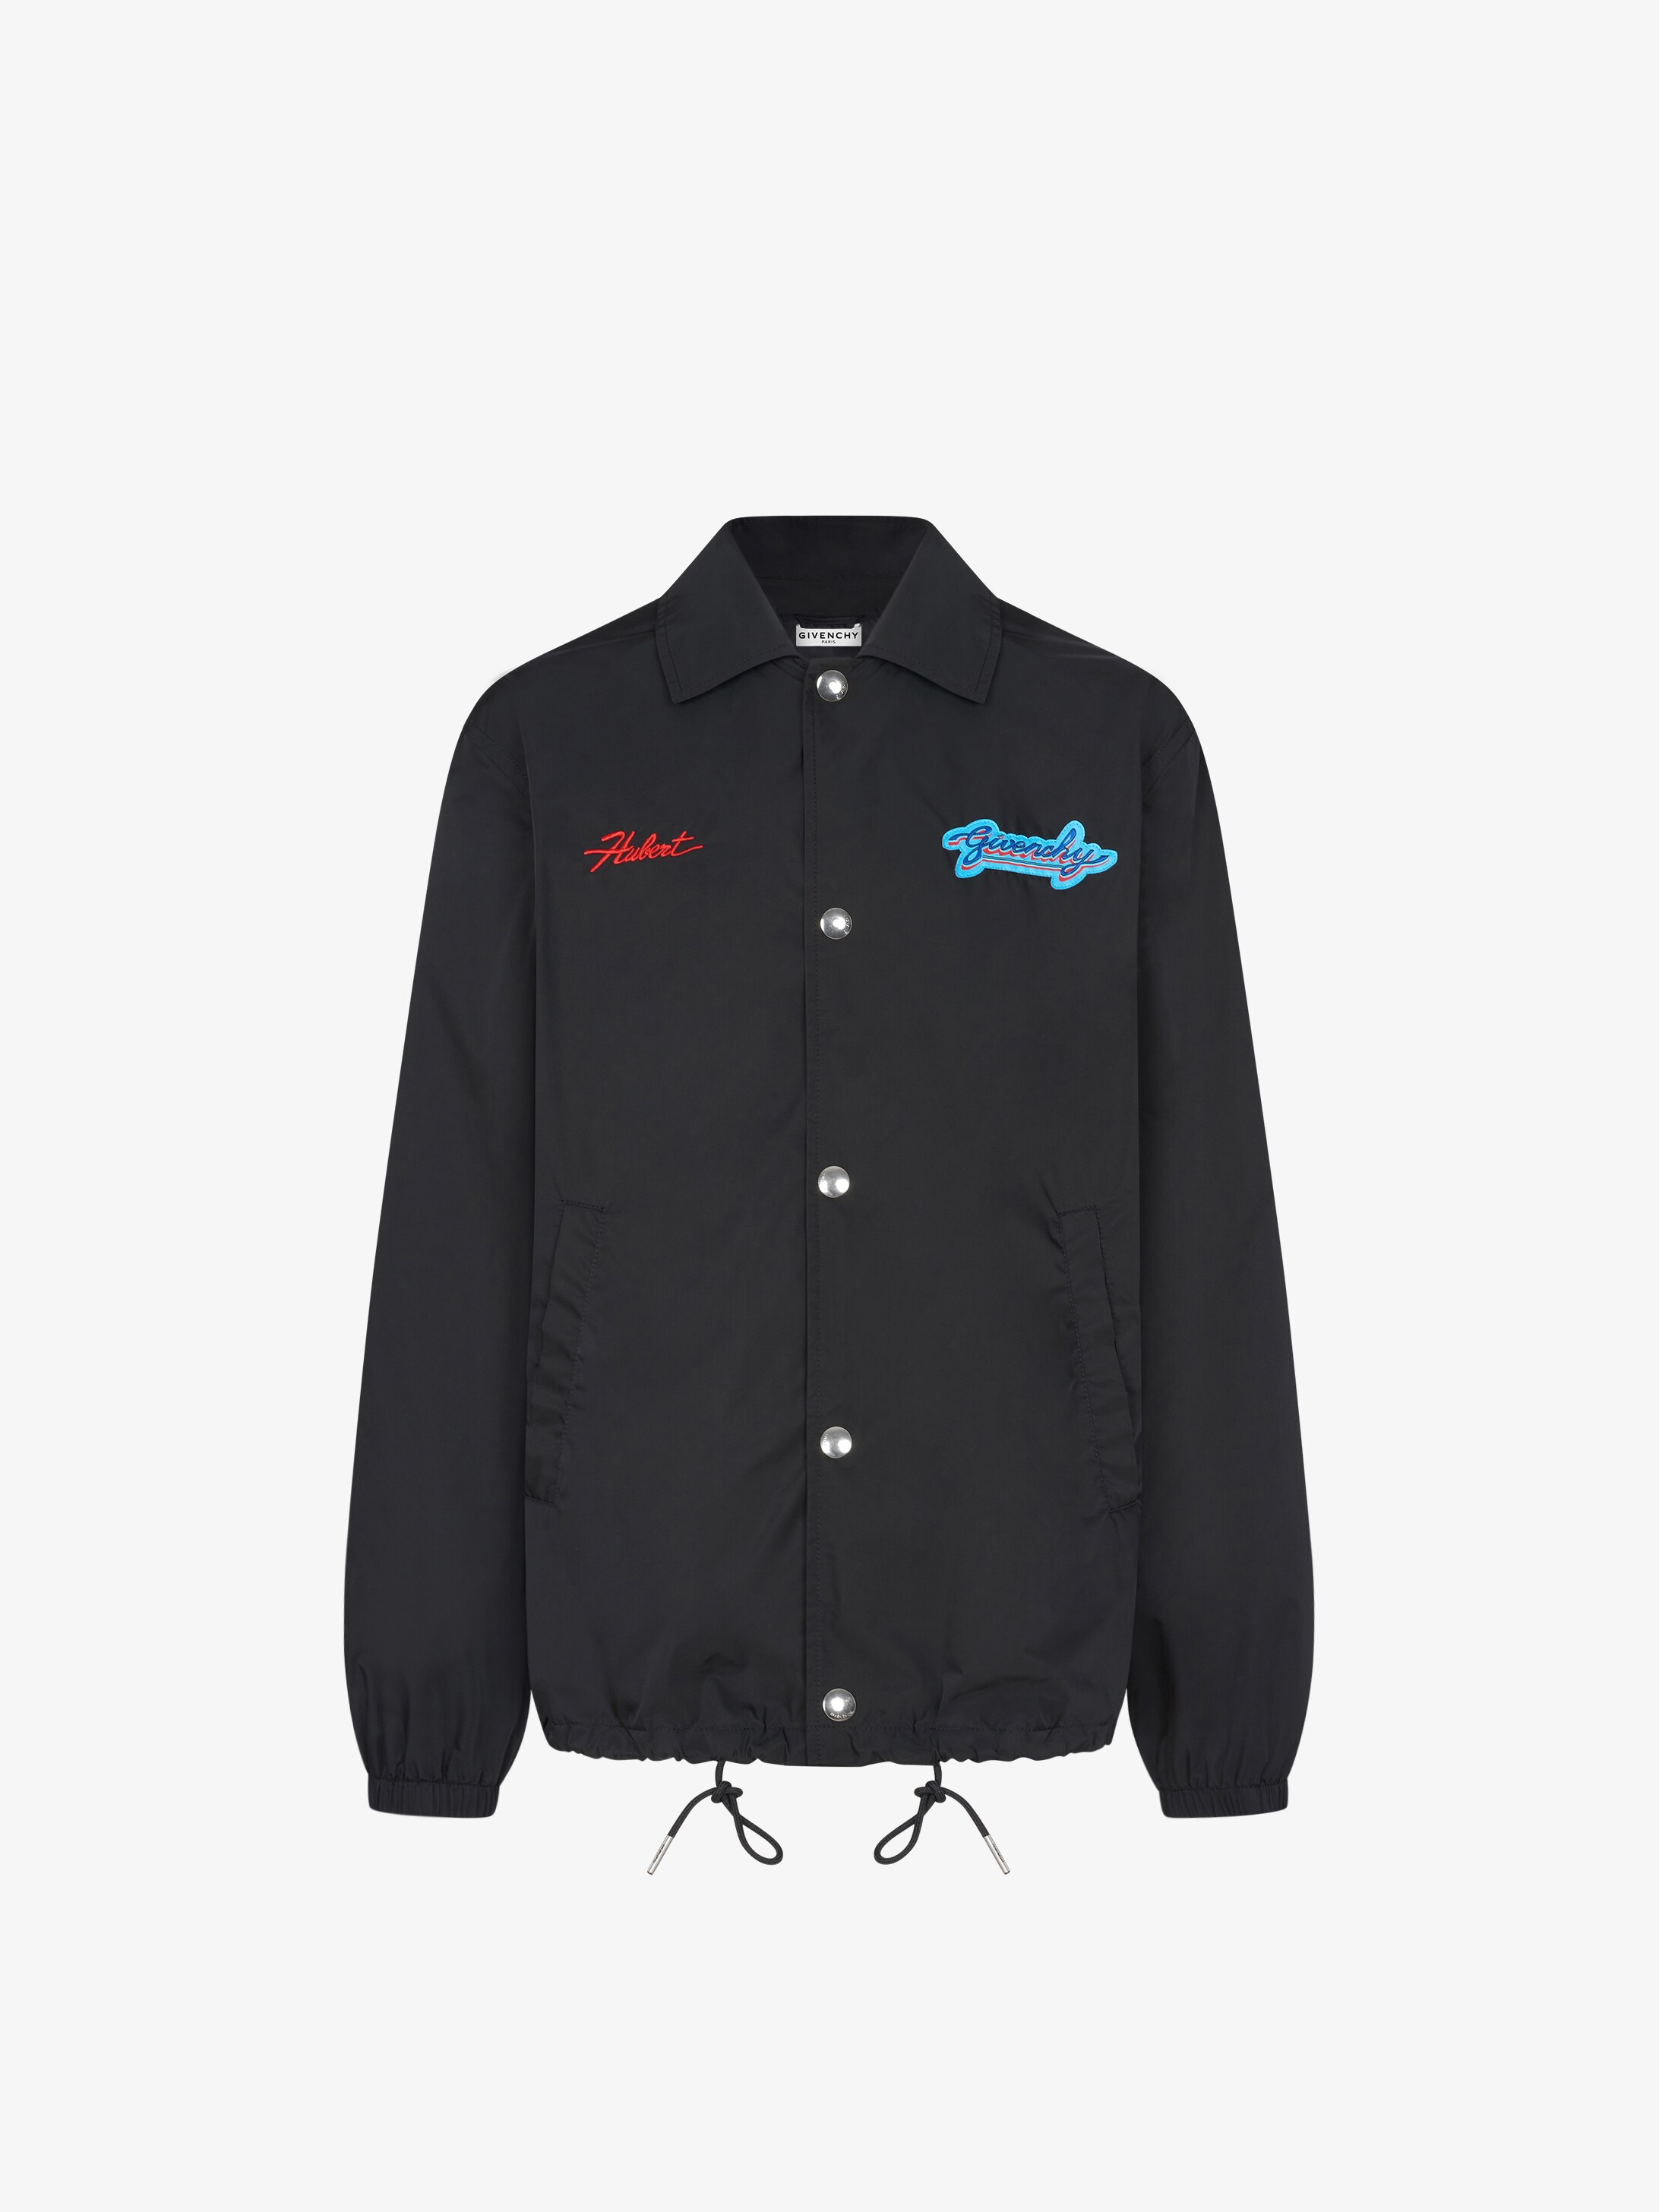 GIVENCHY Motel embroidered windbreaker with patch | GIVENCHY Paris